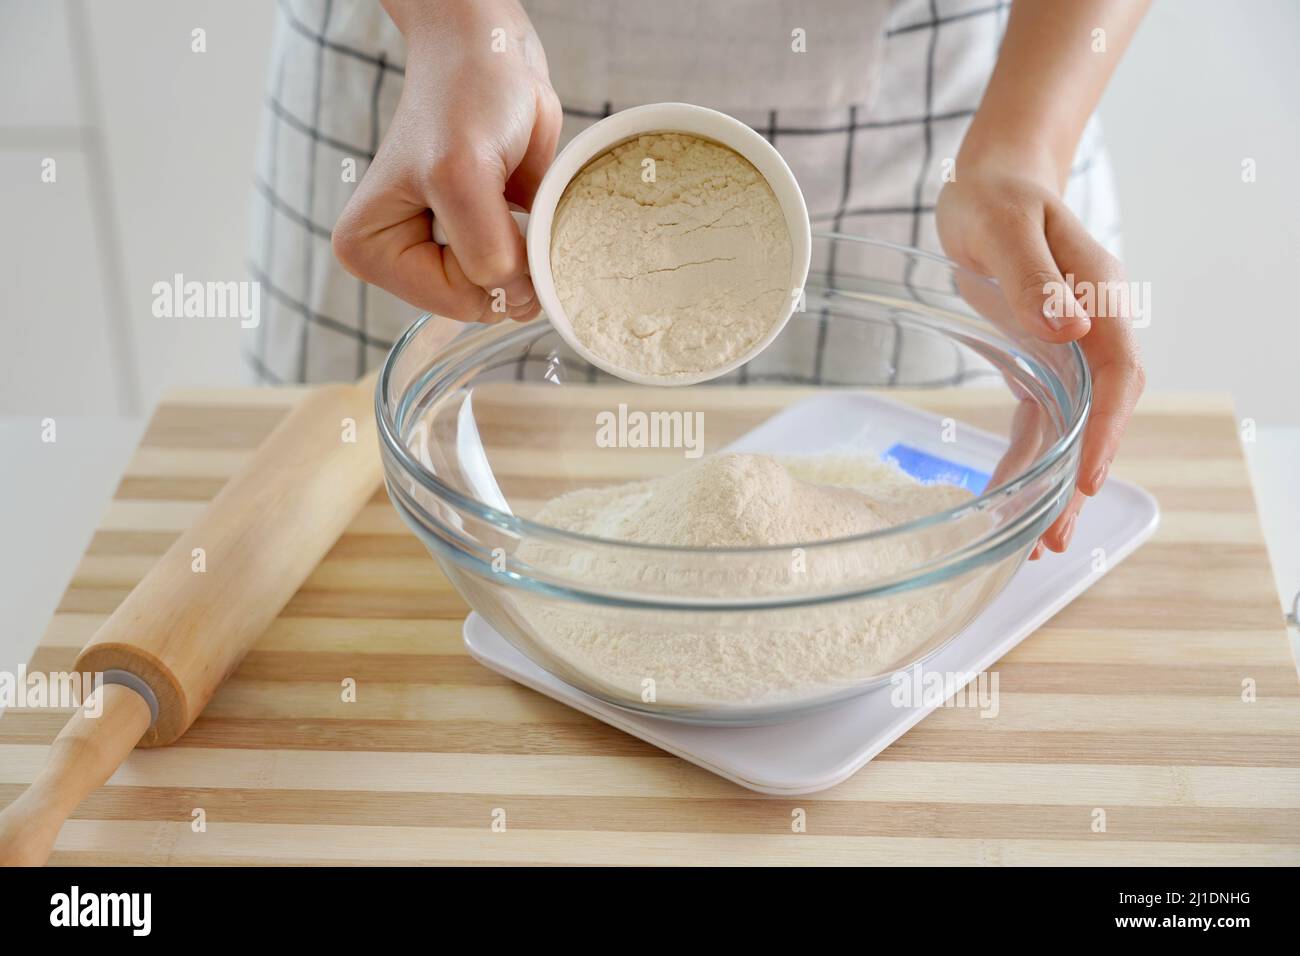 https://c8.alamy.com/comp/2J1DNHG/close-up-woman-weigh-the-flour-on-the-scales-increasing-price-of-wheat-flour-and-bread-homemade-bread-preparation-economic-crisis-2J1DNHG.jpg